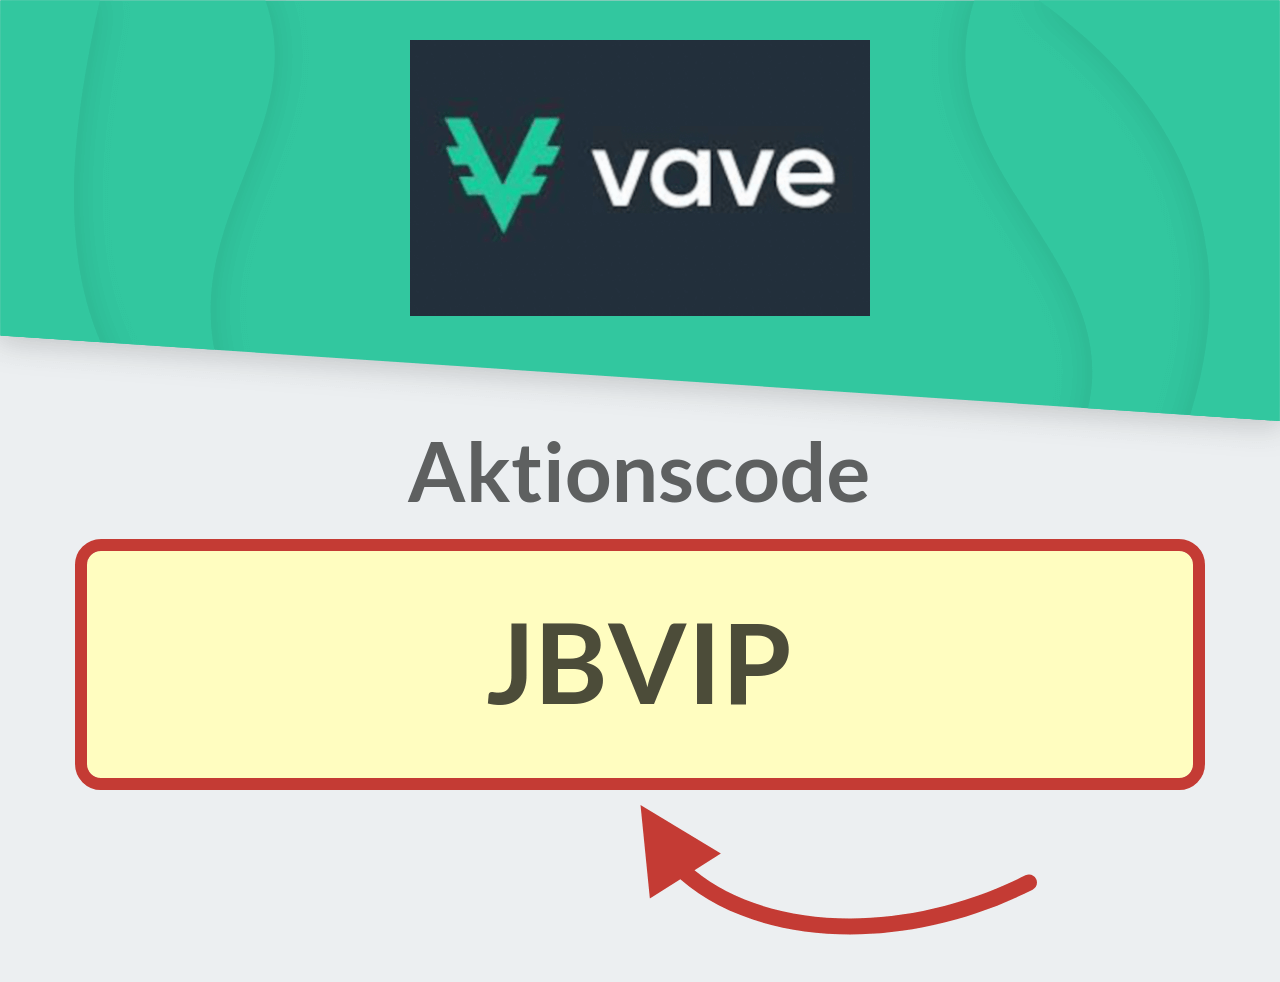 Vave Aktionscode